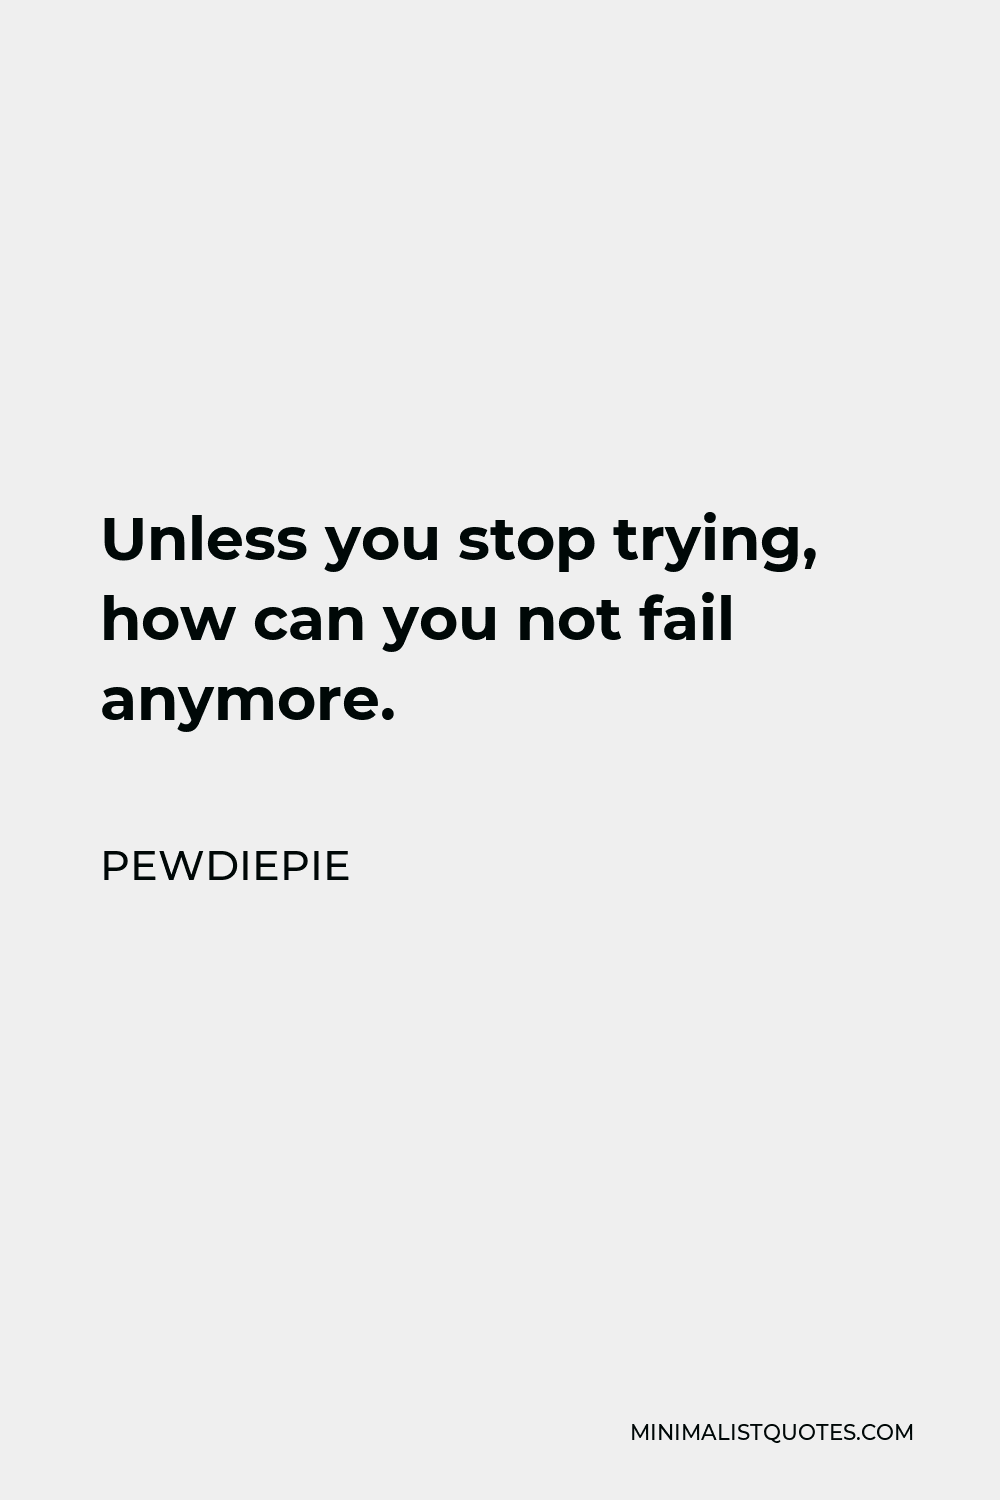 PewDiePie Quote - Unless you stop trying, how can you not fail anymore.